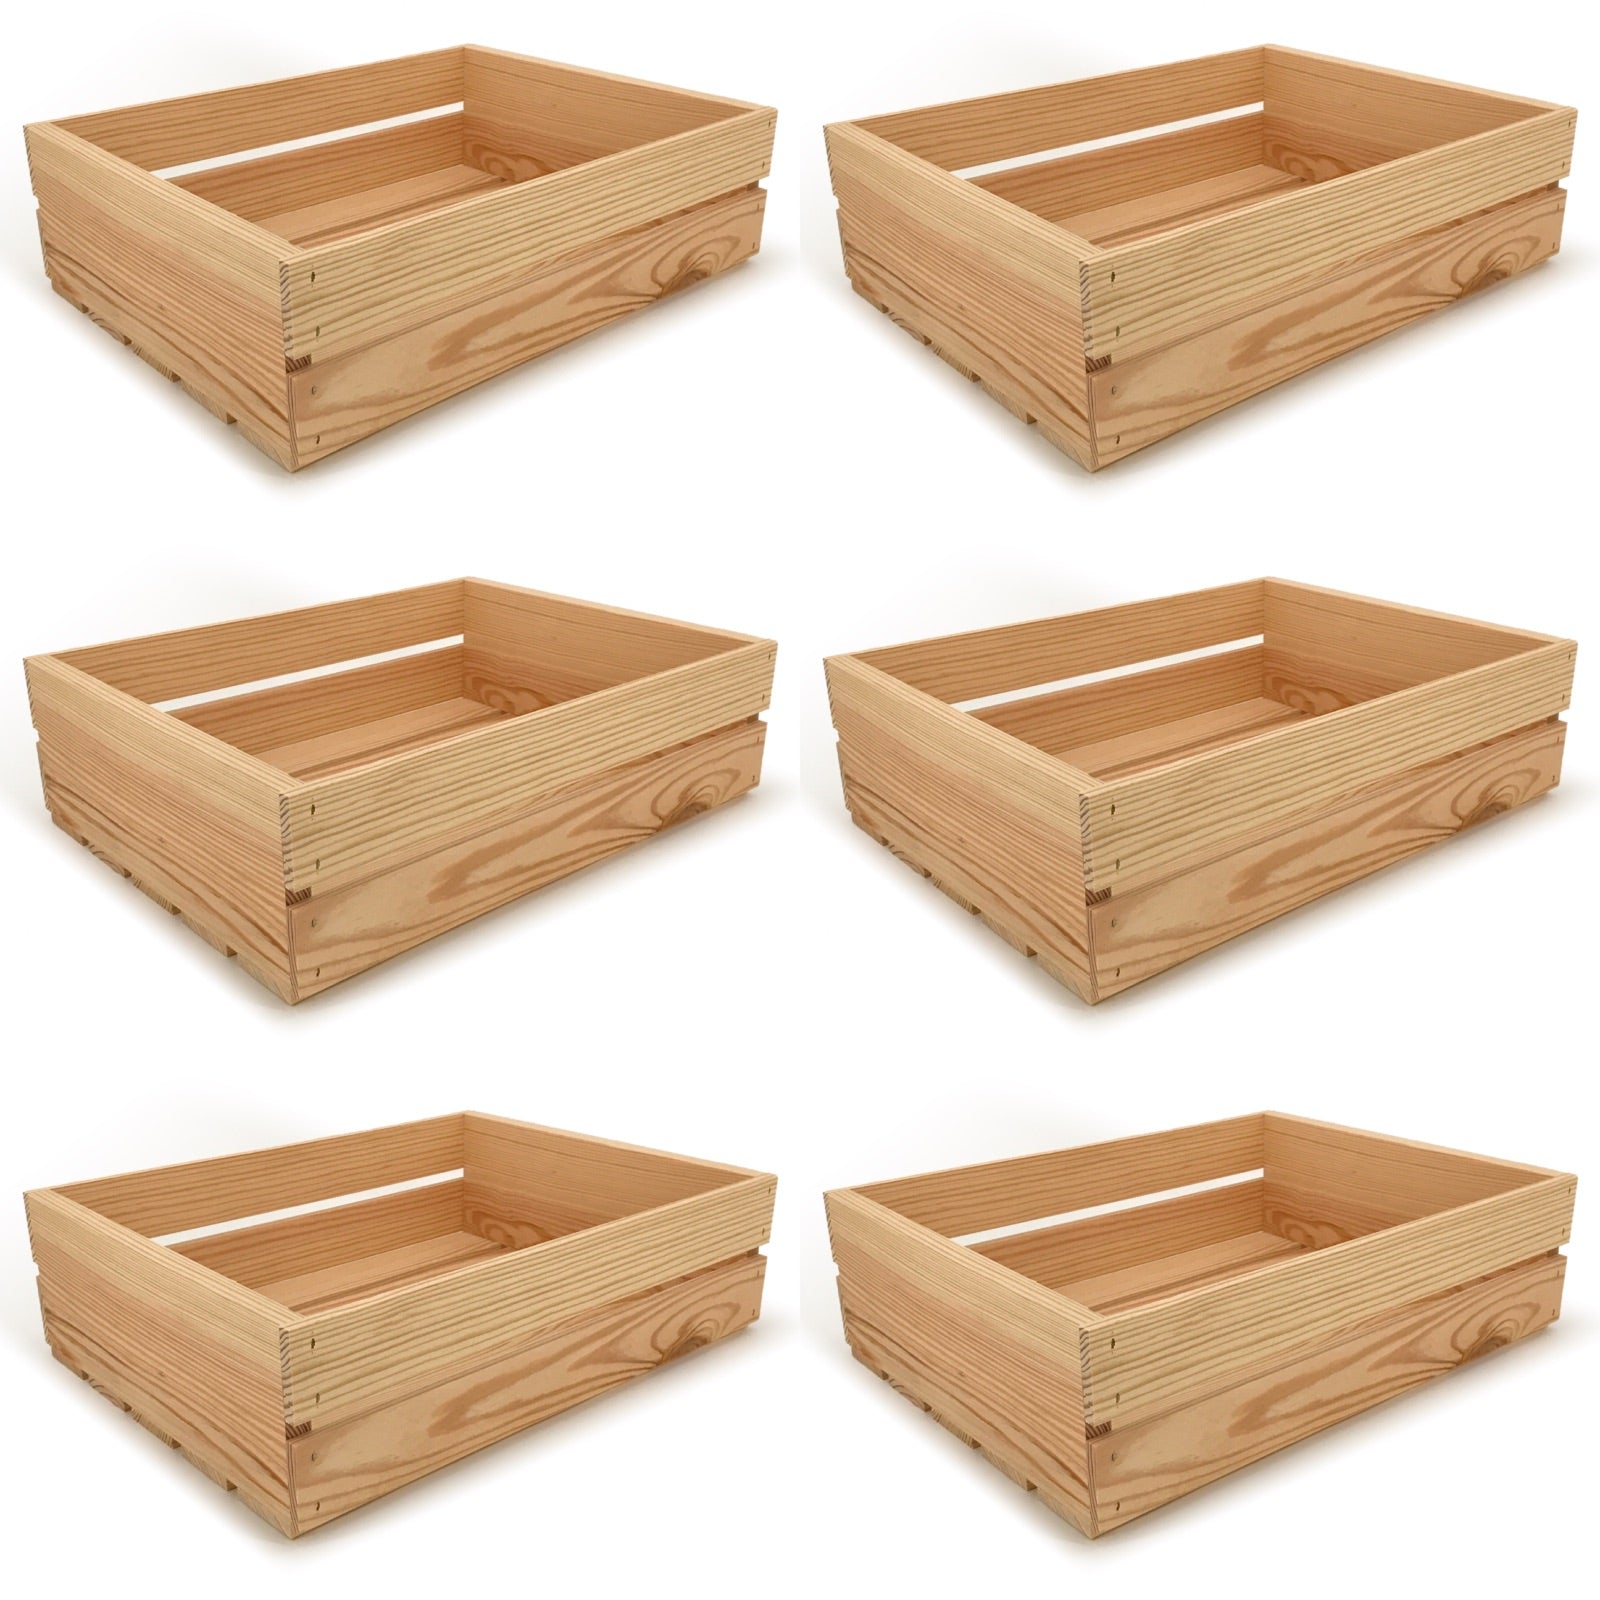 6 Small wooden crates 18x14x5.25, 6-WS-18-14-5.25-NX-NW-NL, 12-WS-18-14-5.25-NX-NW-NL, 24-WS-18-14-5.25-NX-NW-NL, 48-WS-18-14-5.25-NX-NW-NL, 96-WS-18-14-5.25-NX-NW-NL